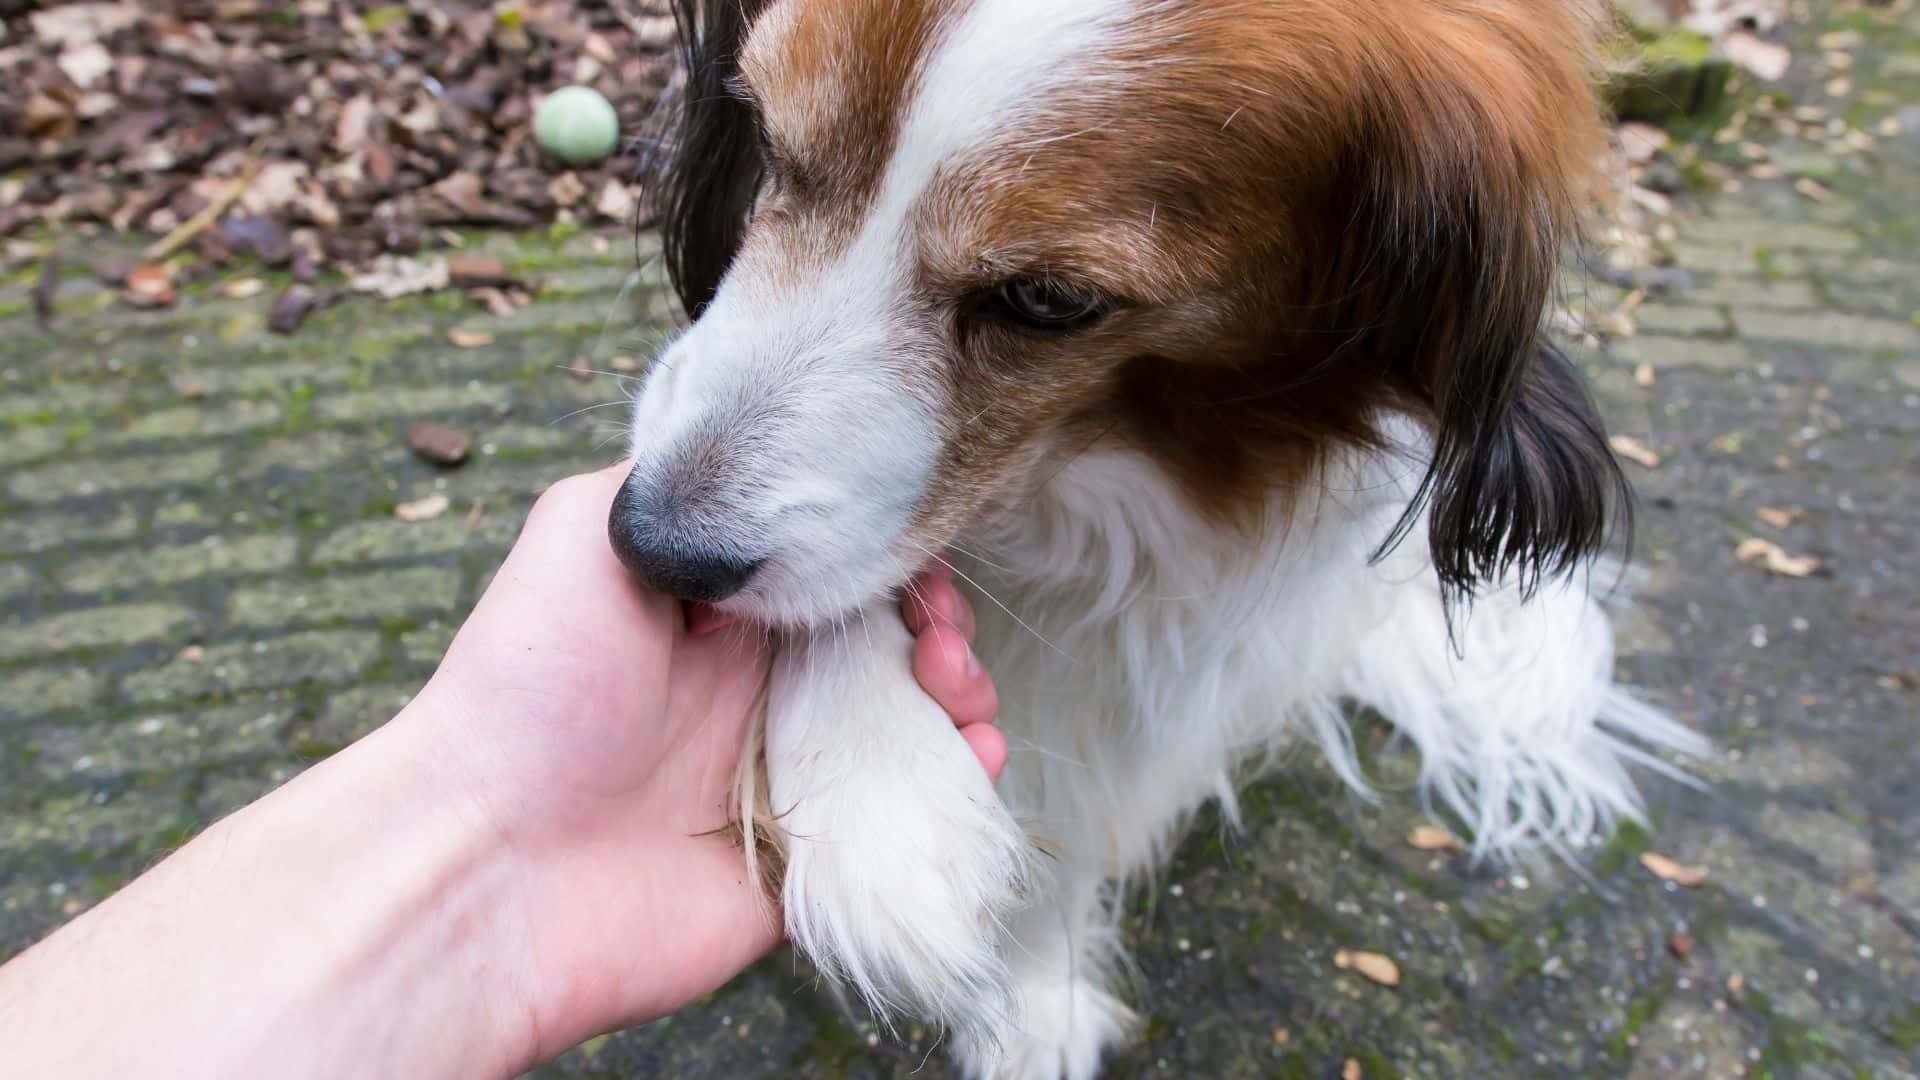 Dogs licking paws after grooming